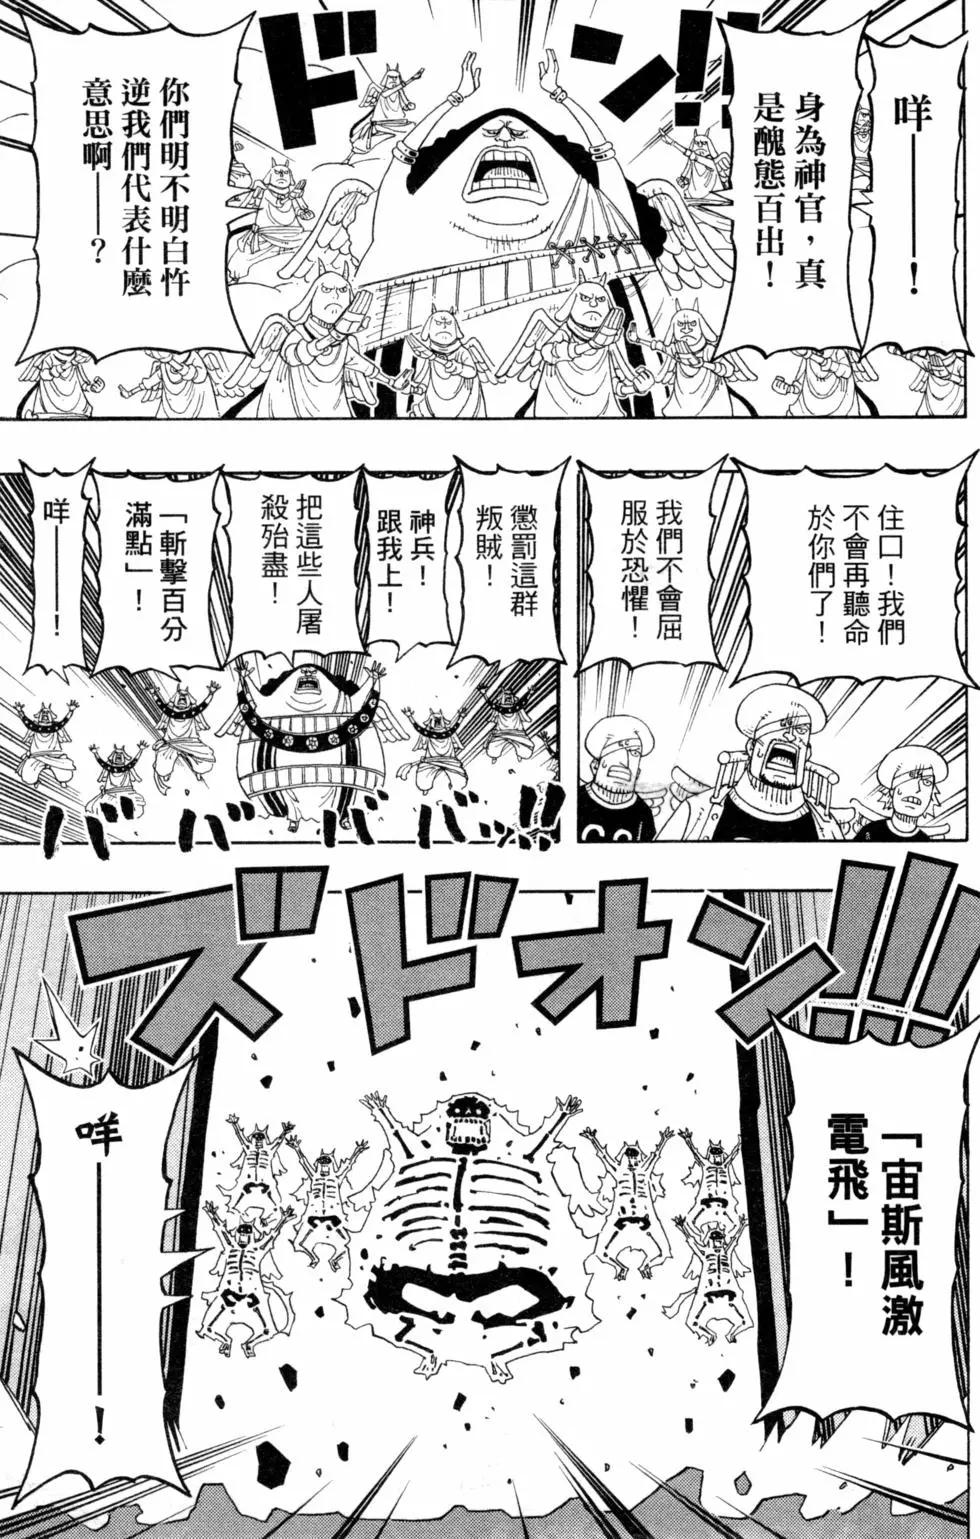 One piece party - 第06卷(2/4) - 4